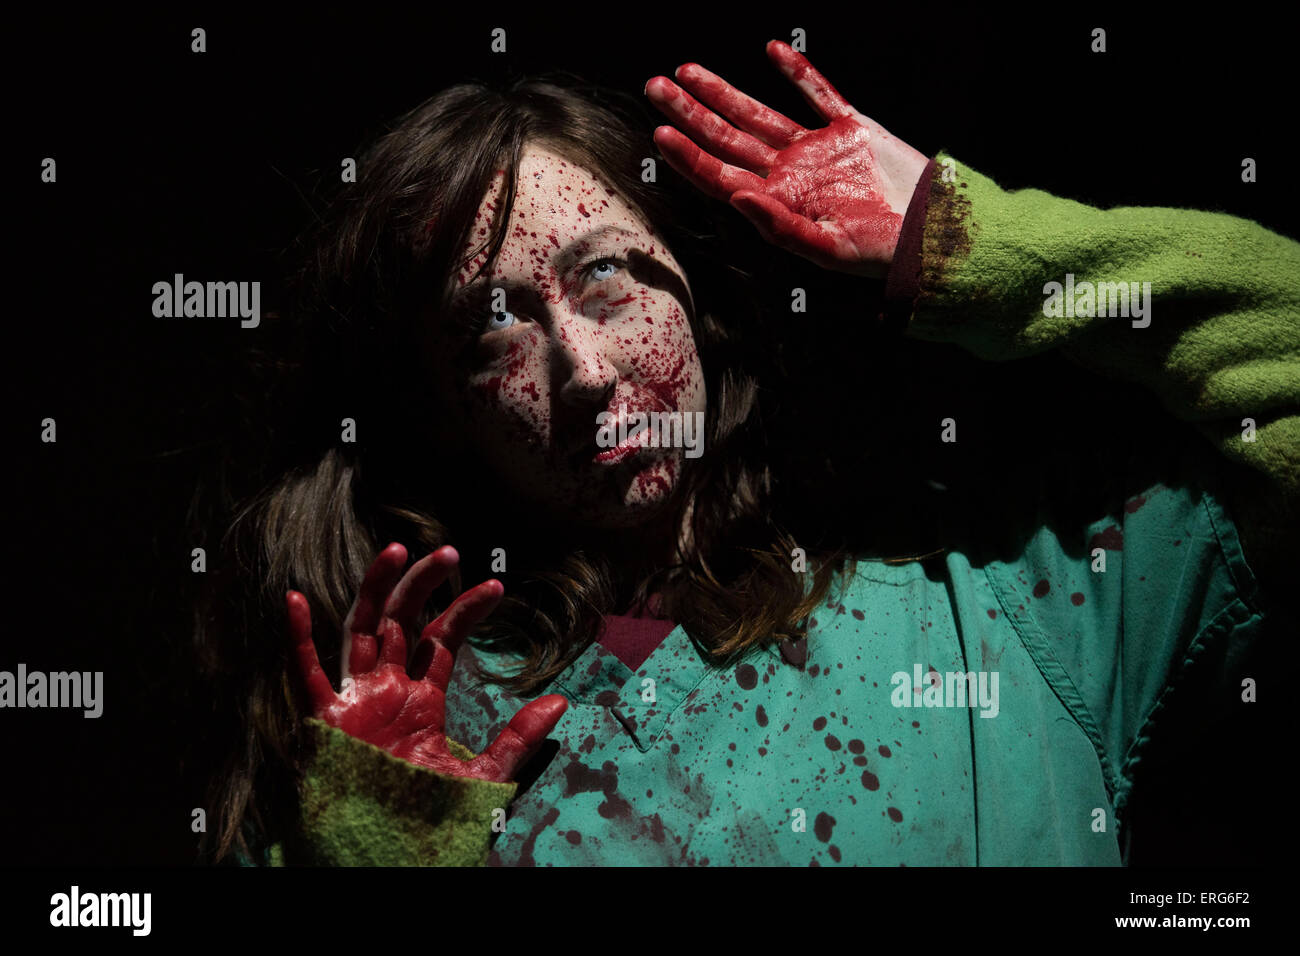 A female zombie with face splattered with blood. Stock Photo